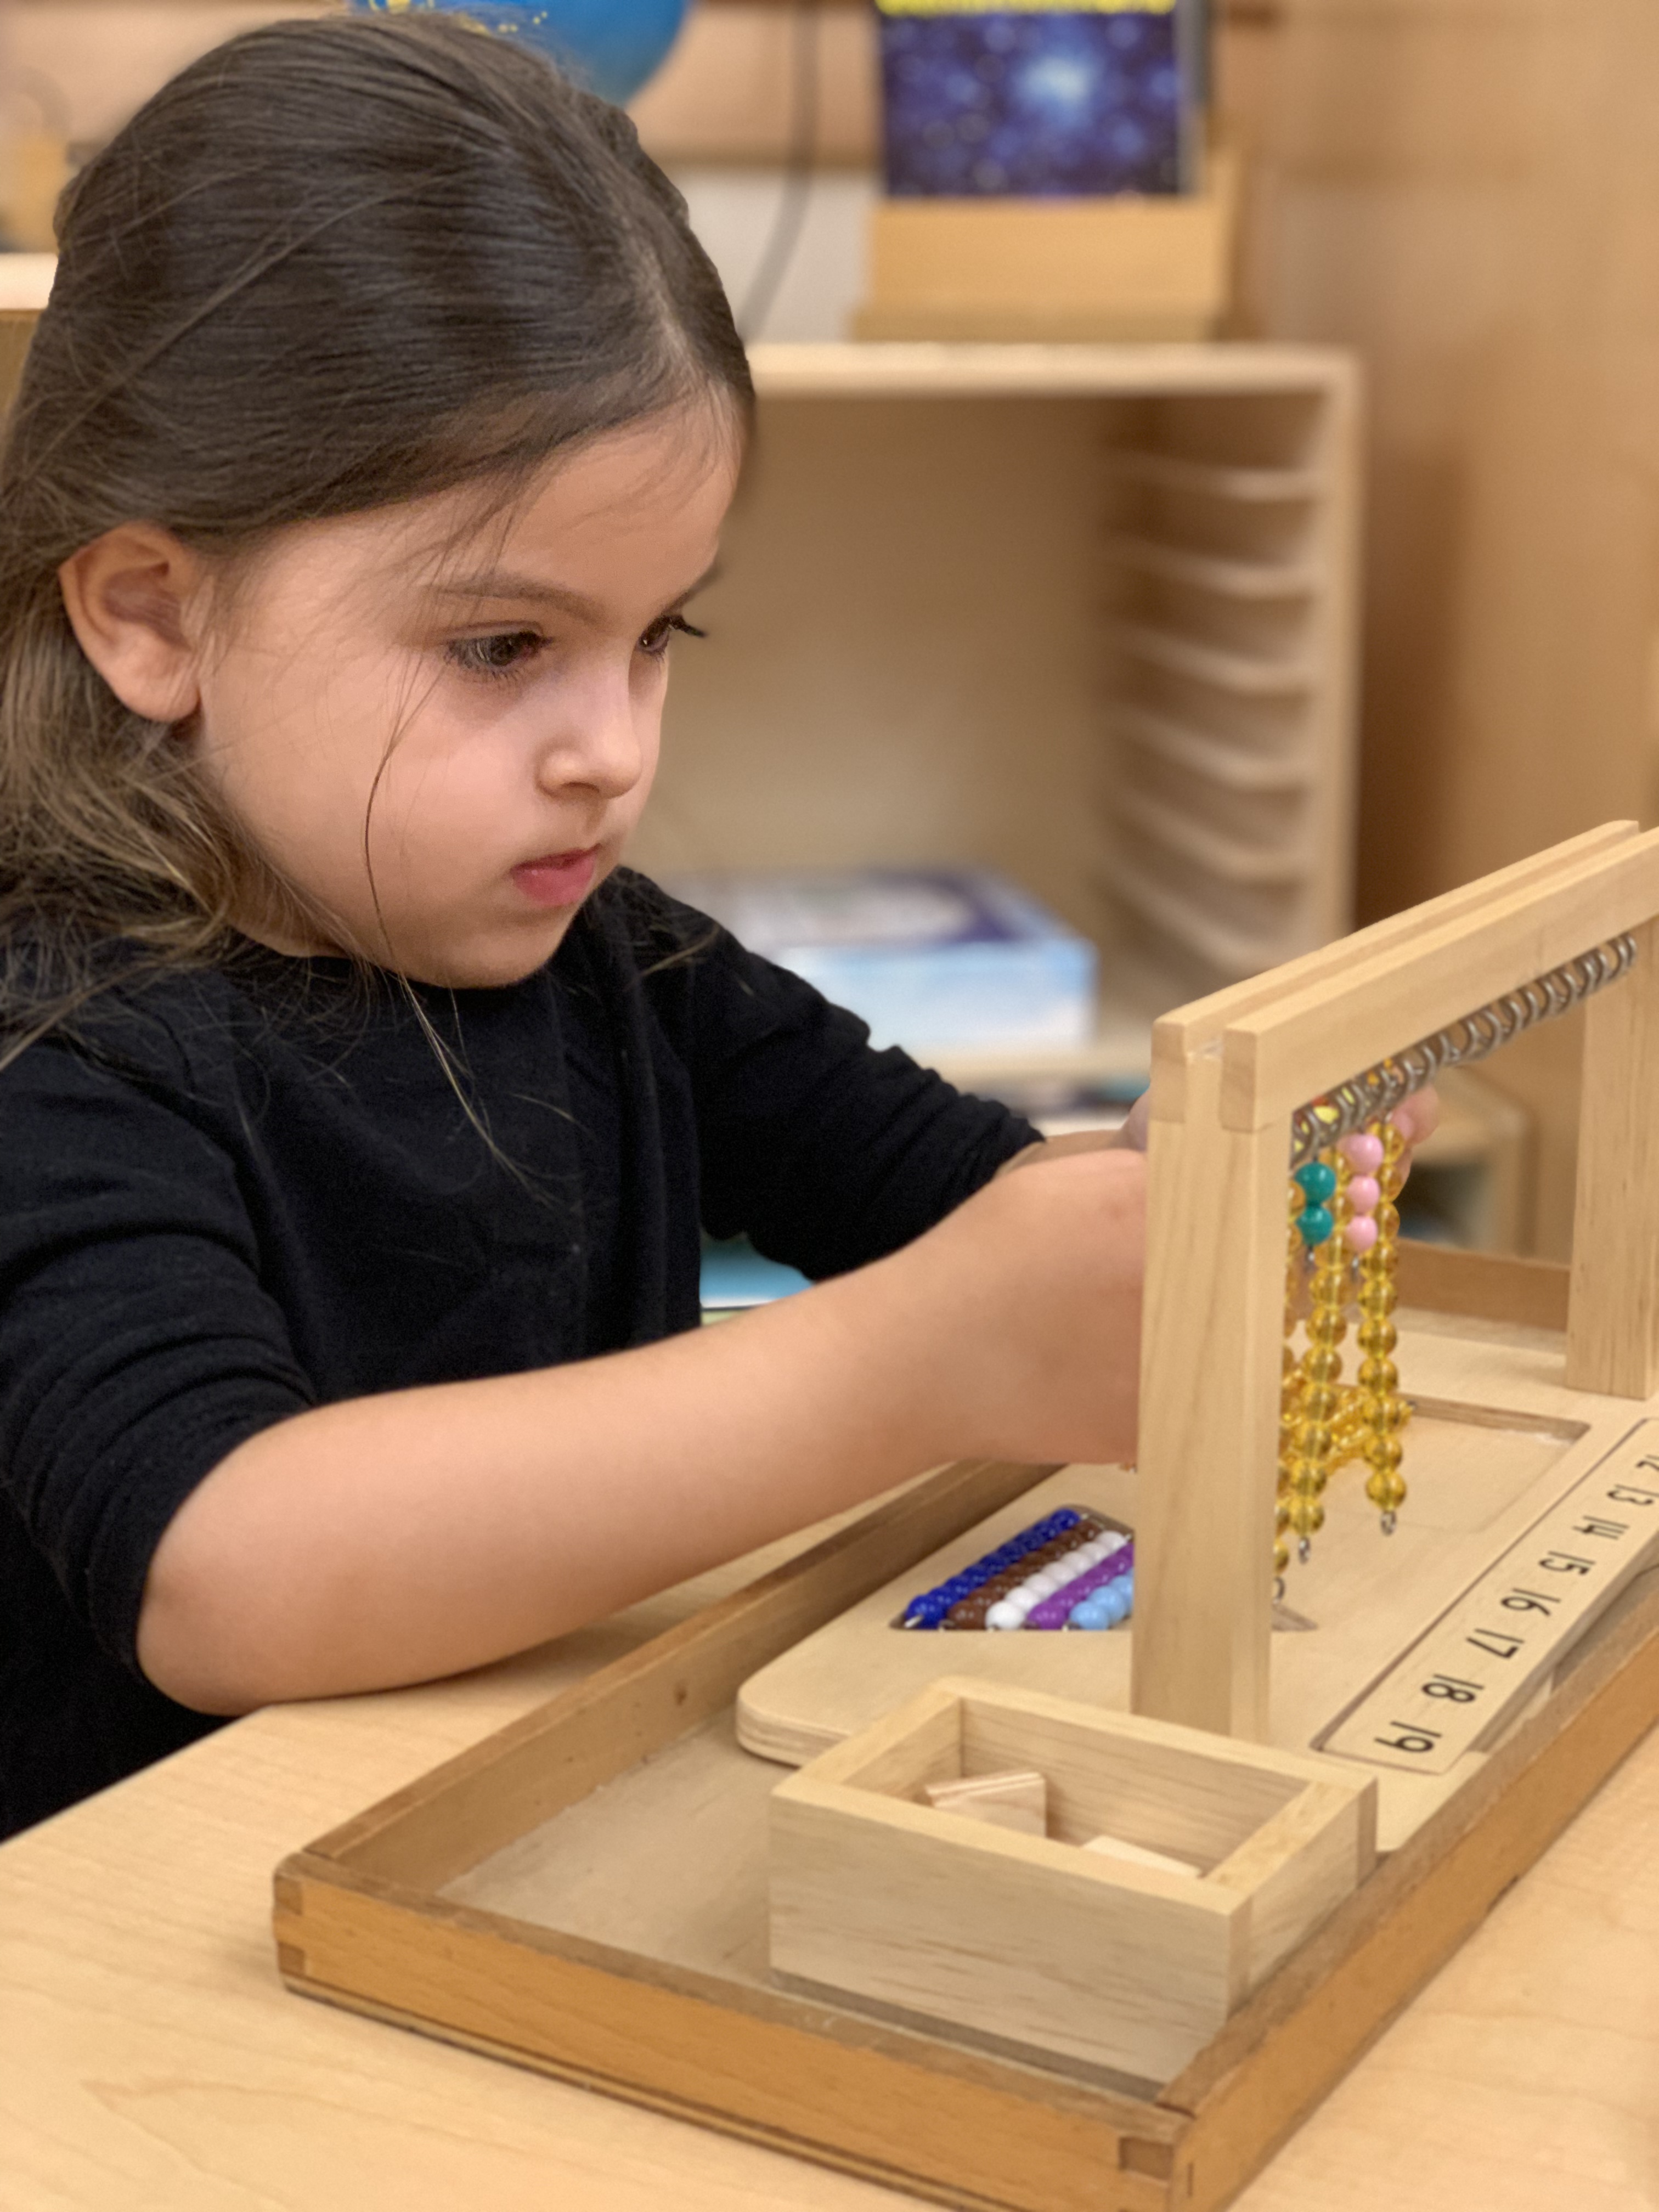 Young students learning in a Montessori way